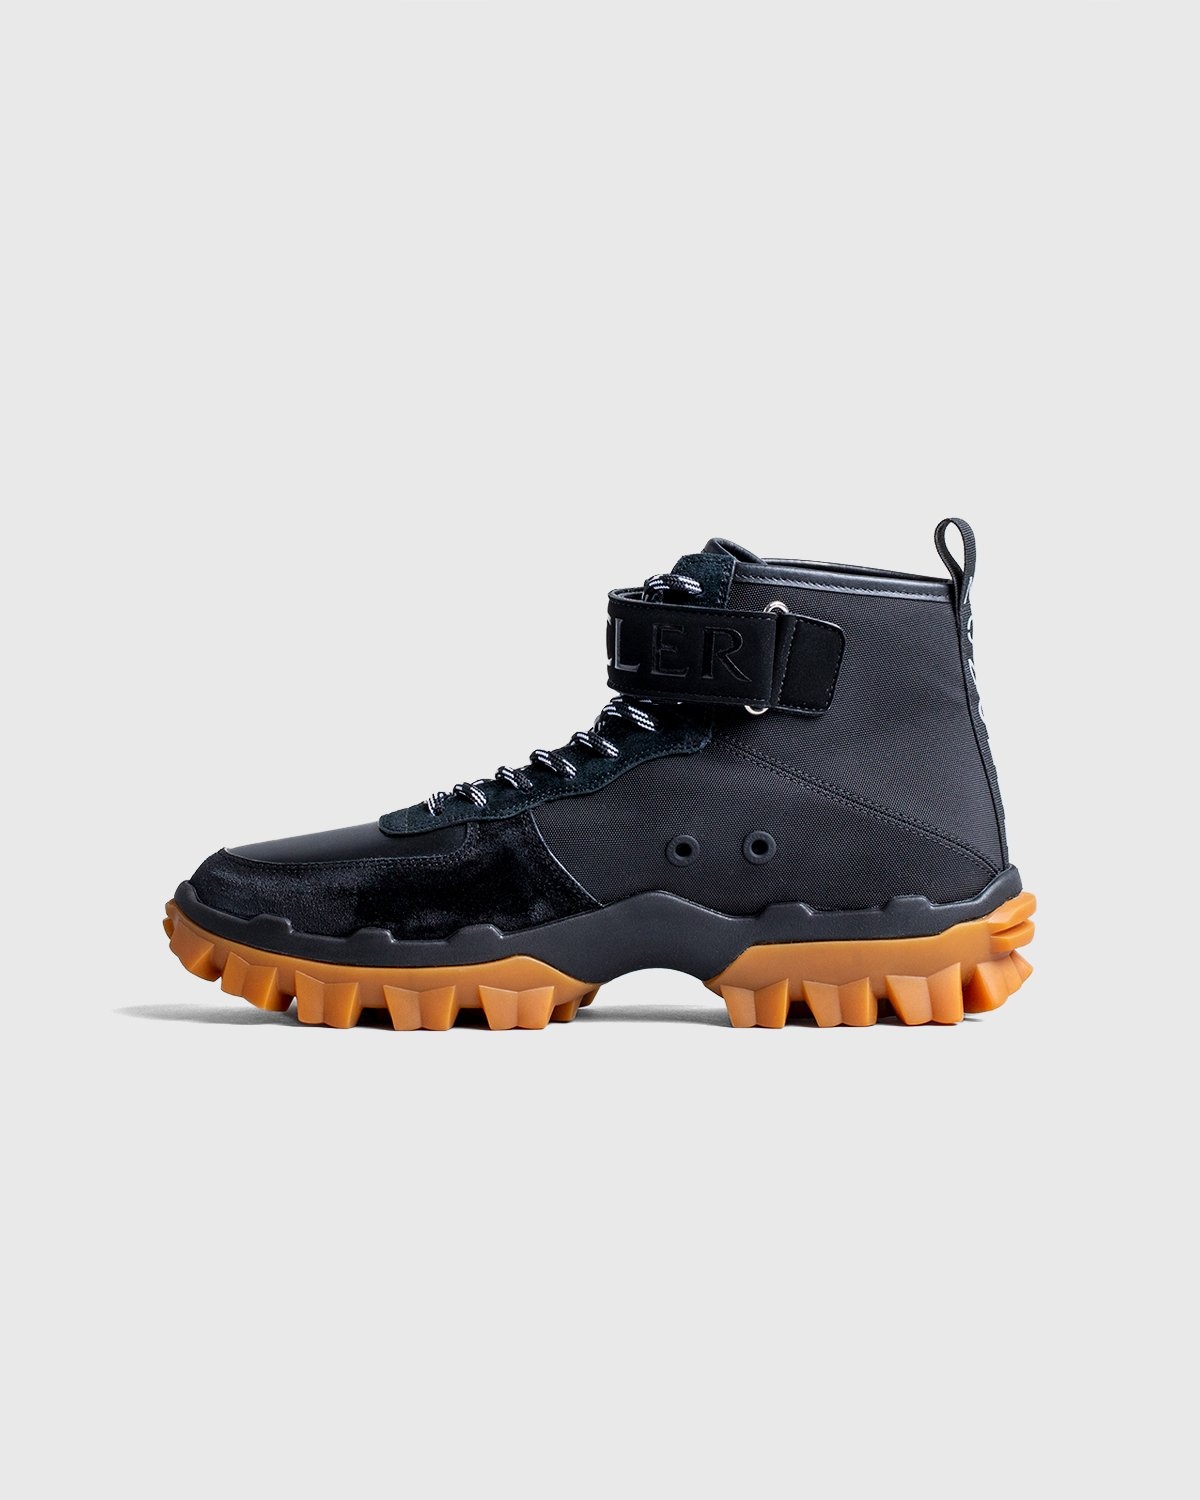 Moncler Genius – Recycled Hugo Shoes - Shoes - Black - Image 2